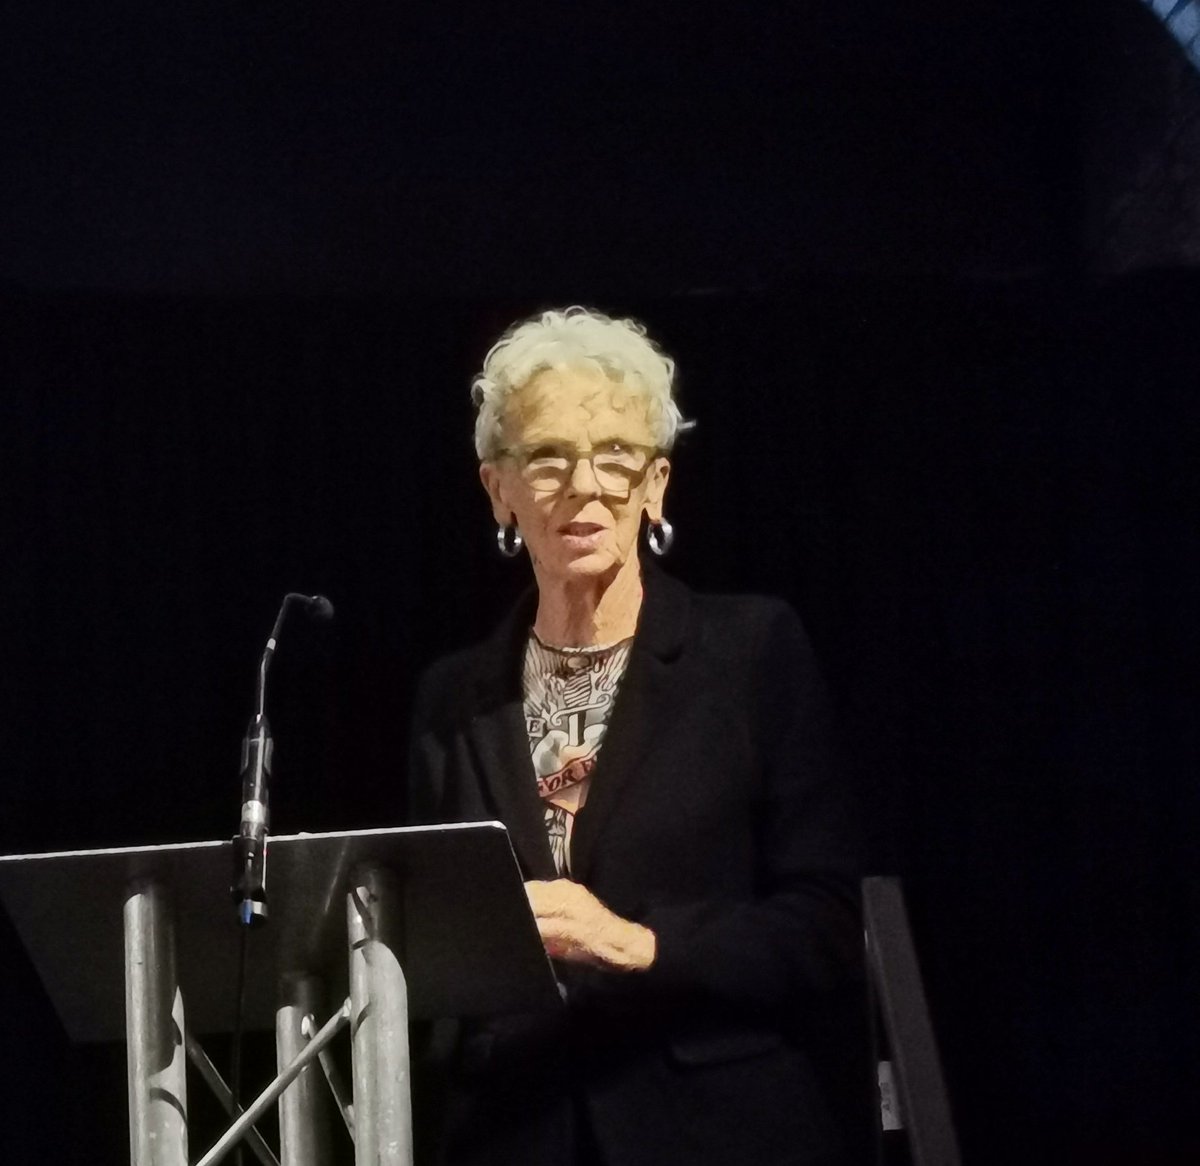 @beatrixcampbell your #SecretsandSilence session at #FiLiA2023  on revelations about The Cleveland Sex Abuse scandal was delivered with breath-taking clarity and was utterly spell-binding.